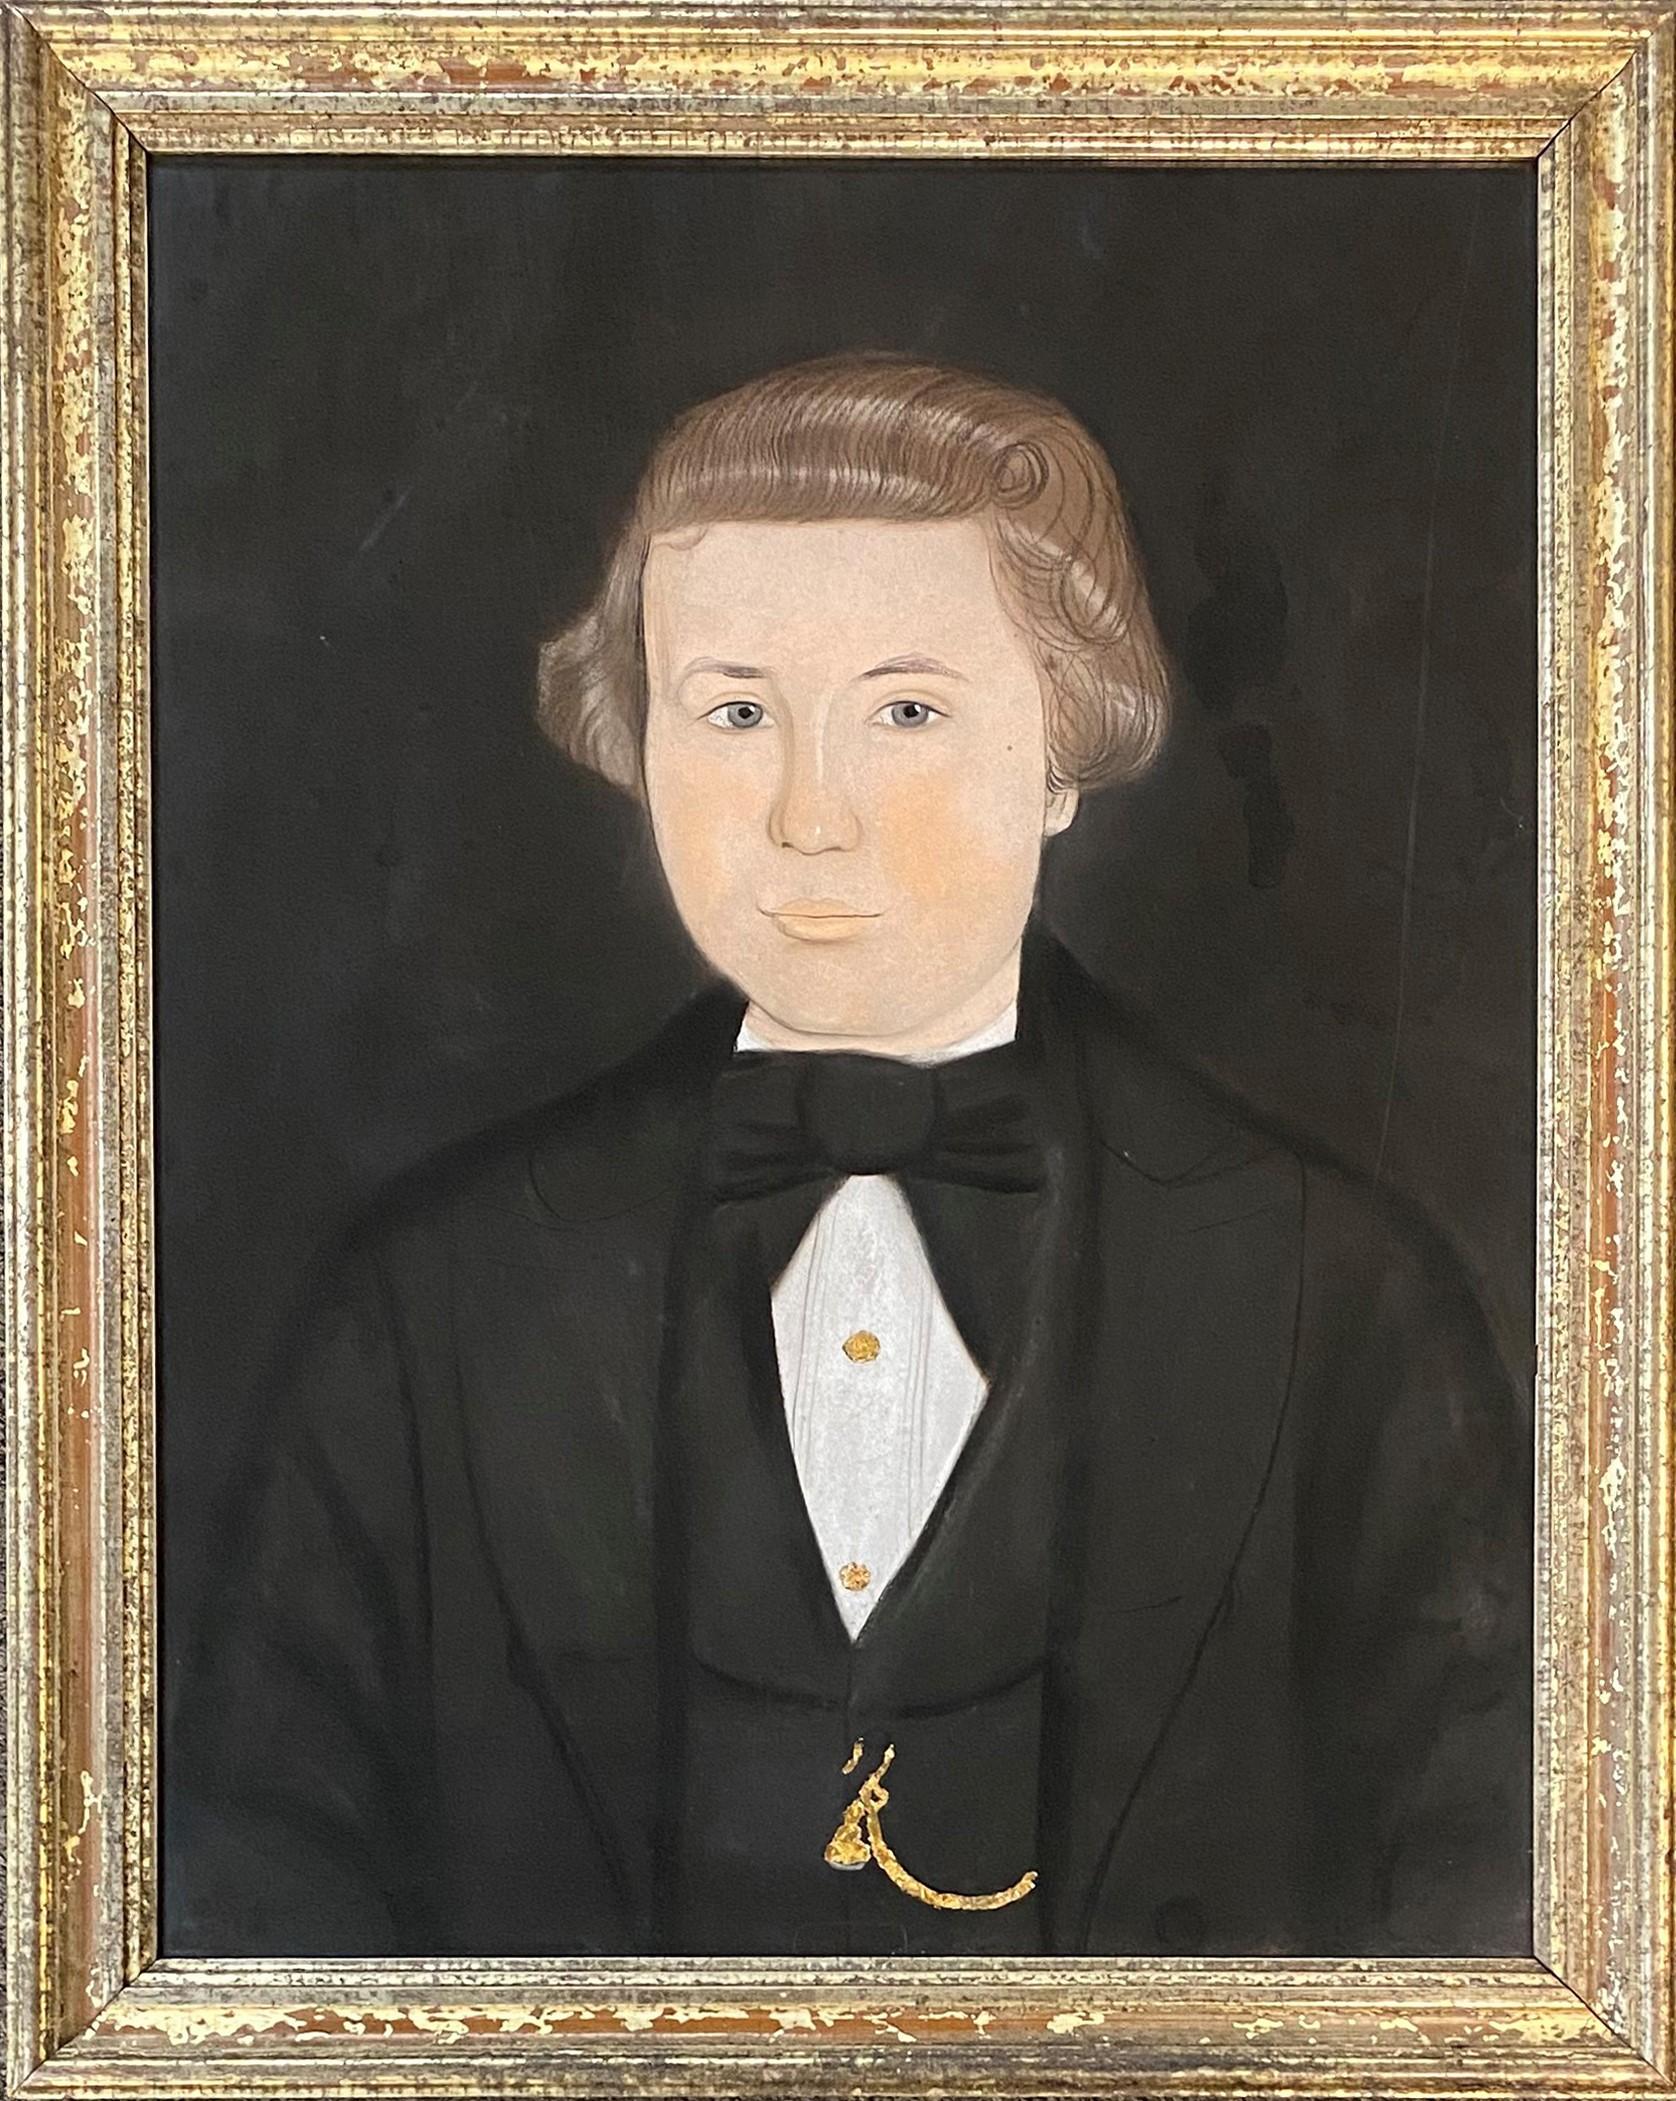 Unknown Portrait Painting - Early 19th Century American School Pastel Portrait of a Young Man